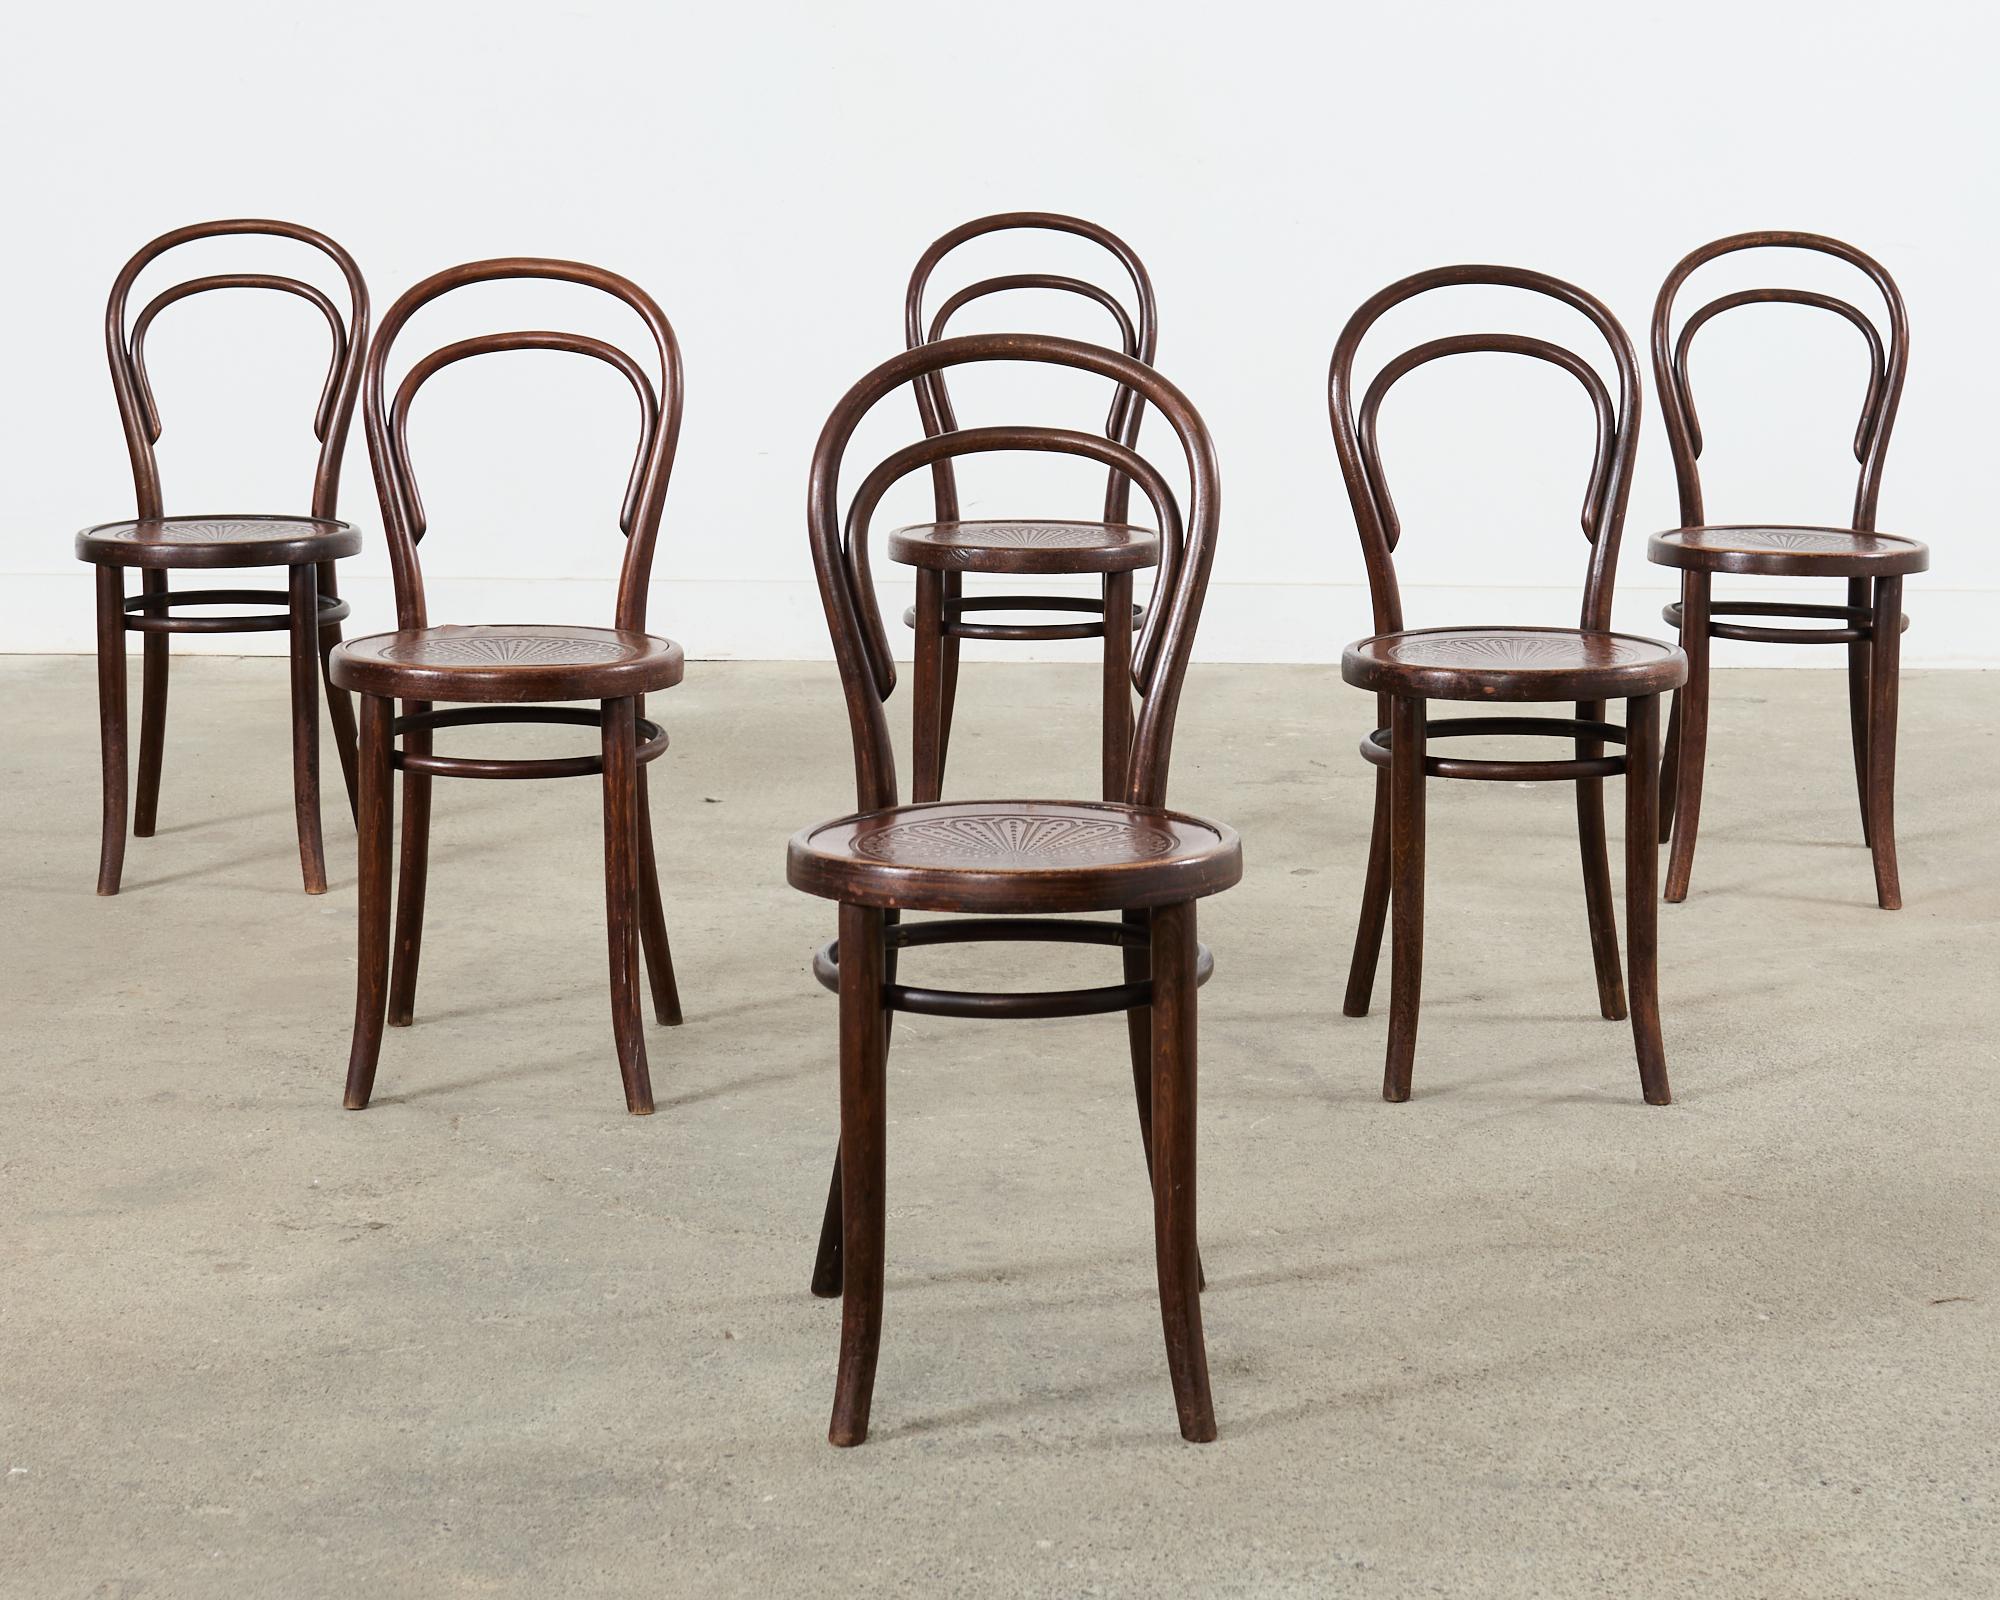 Iconic set of six matching 19th century early Thonet No. 14 konsumstuhl bistro or coffee shop chairs crafted from bentwood. Known as the 